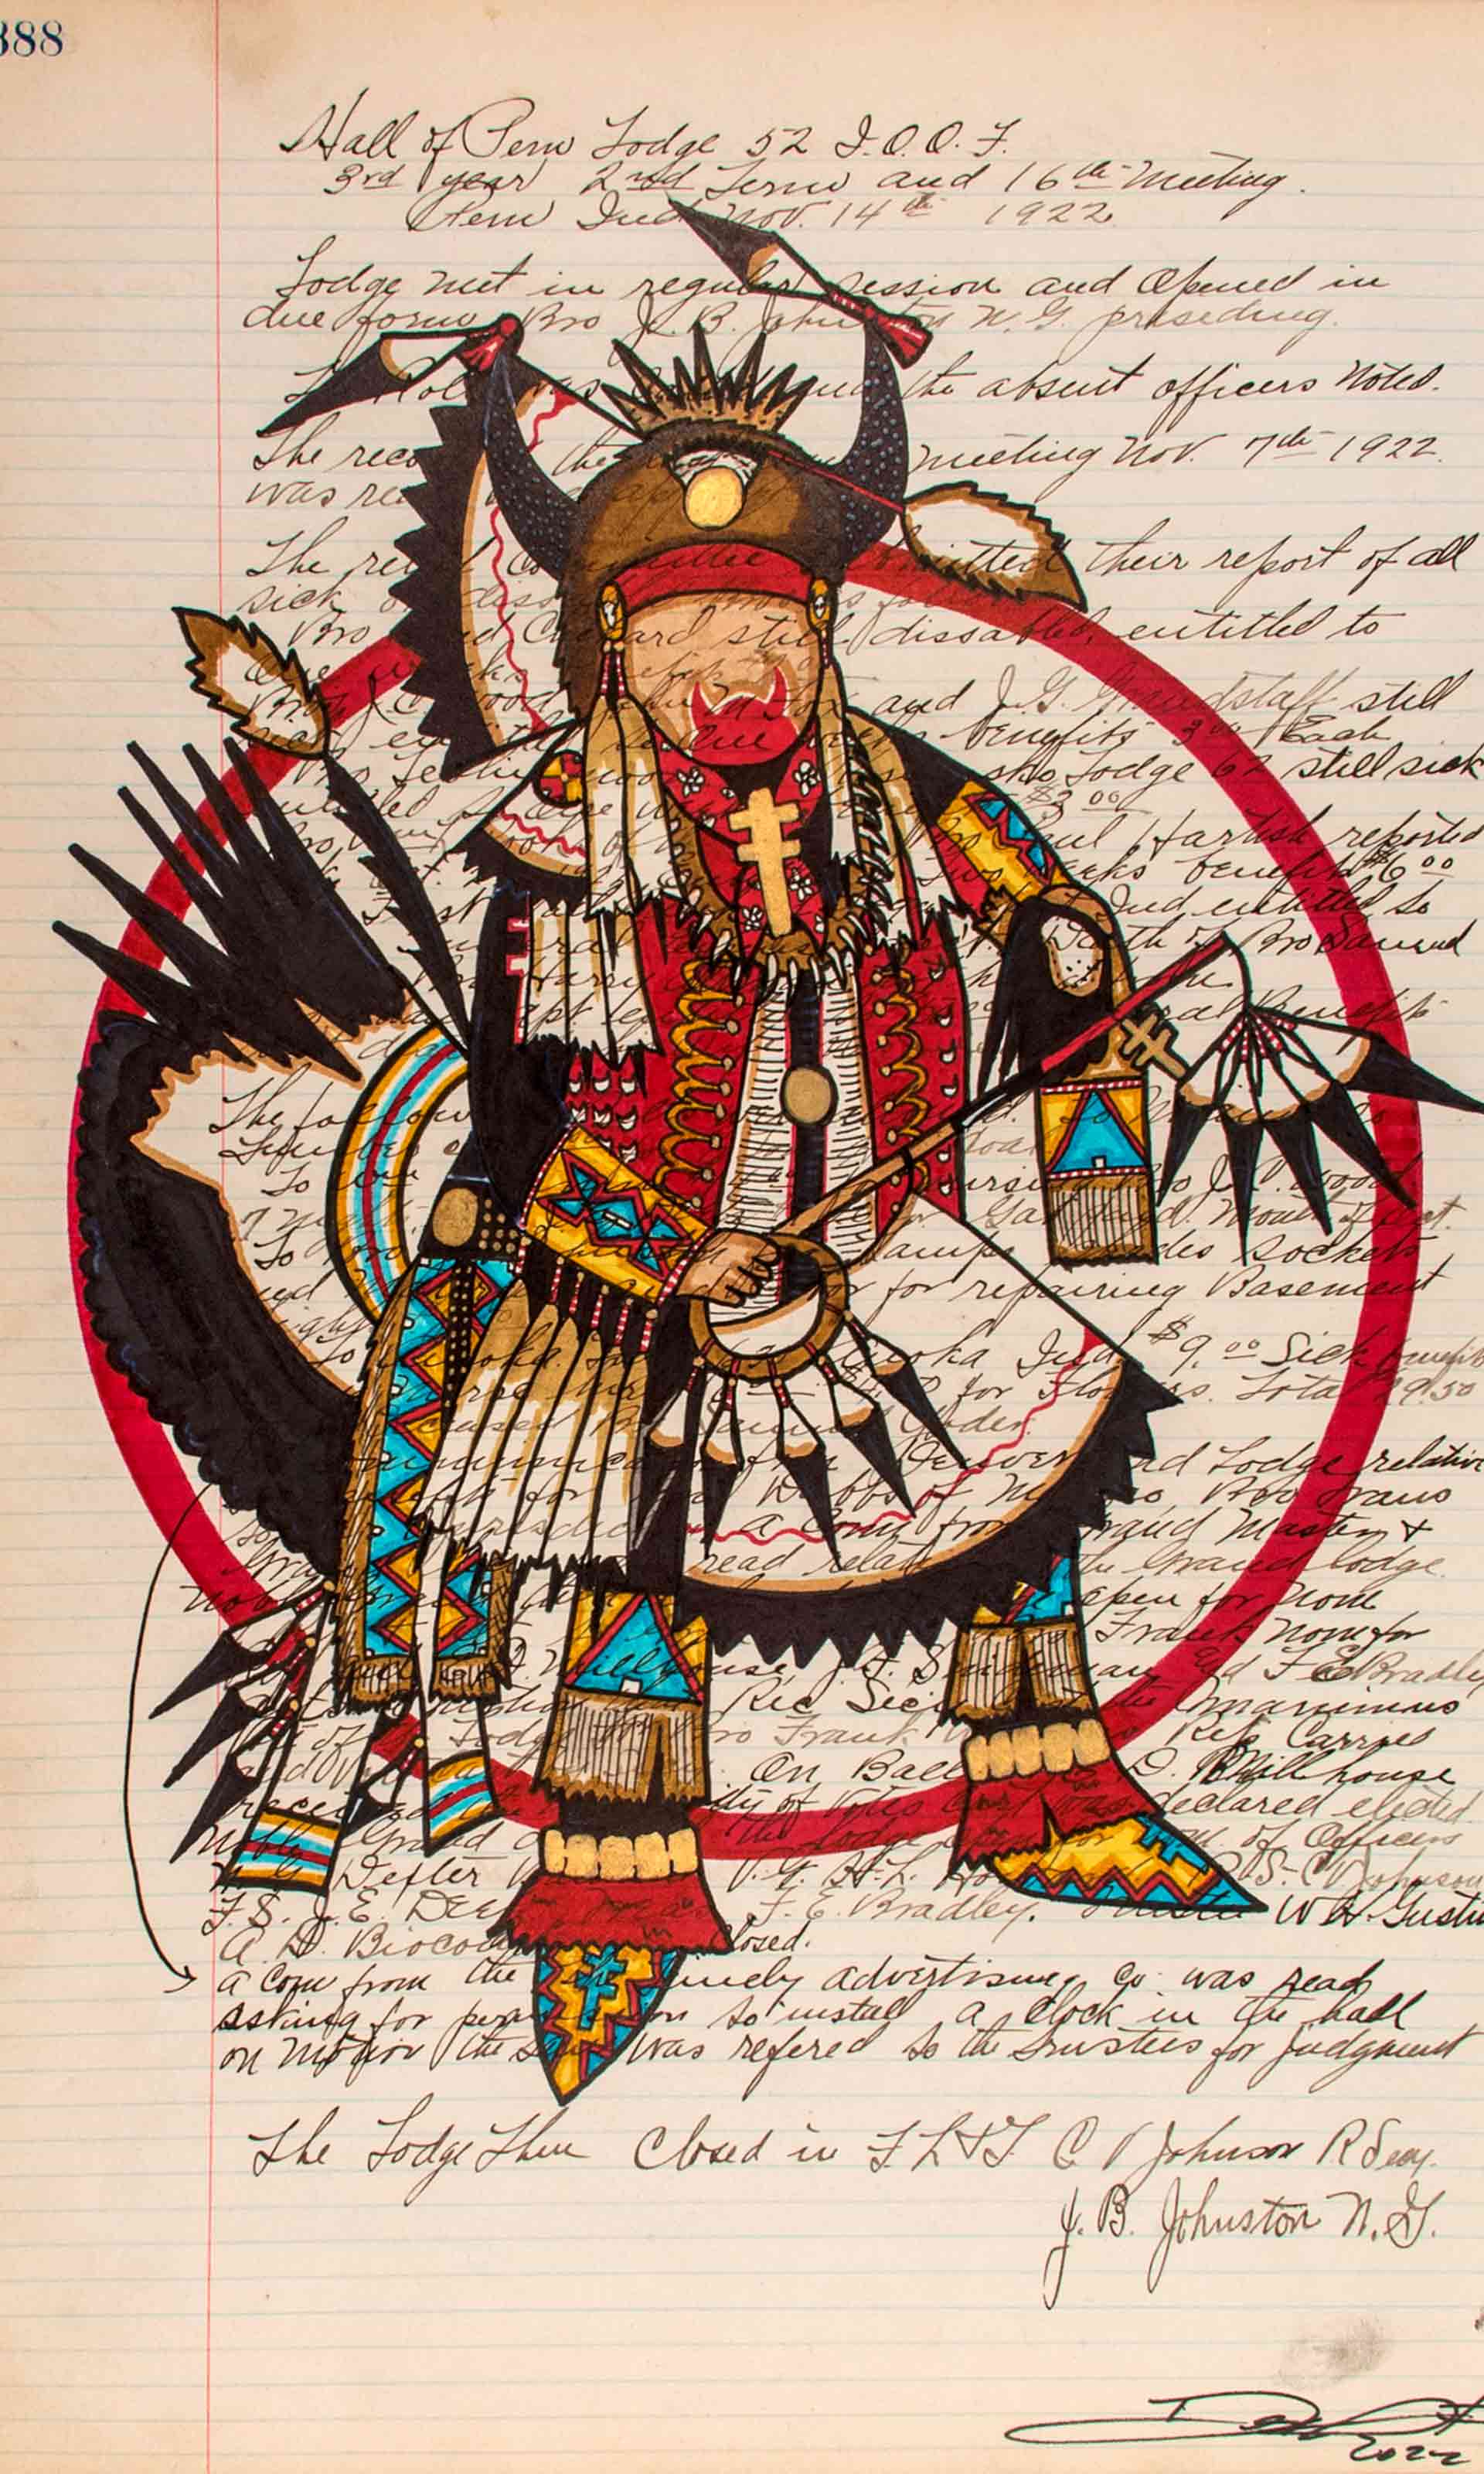 illustration of a Native American man wearing elaborate clothing and dancing with a red circle and handwritten text in the background